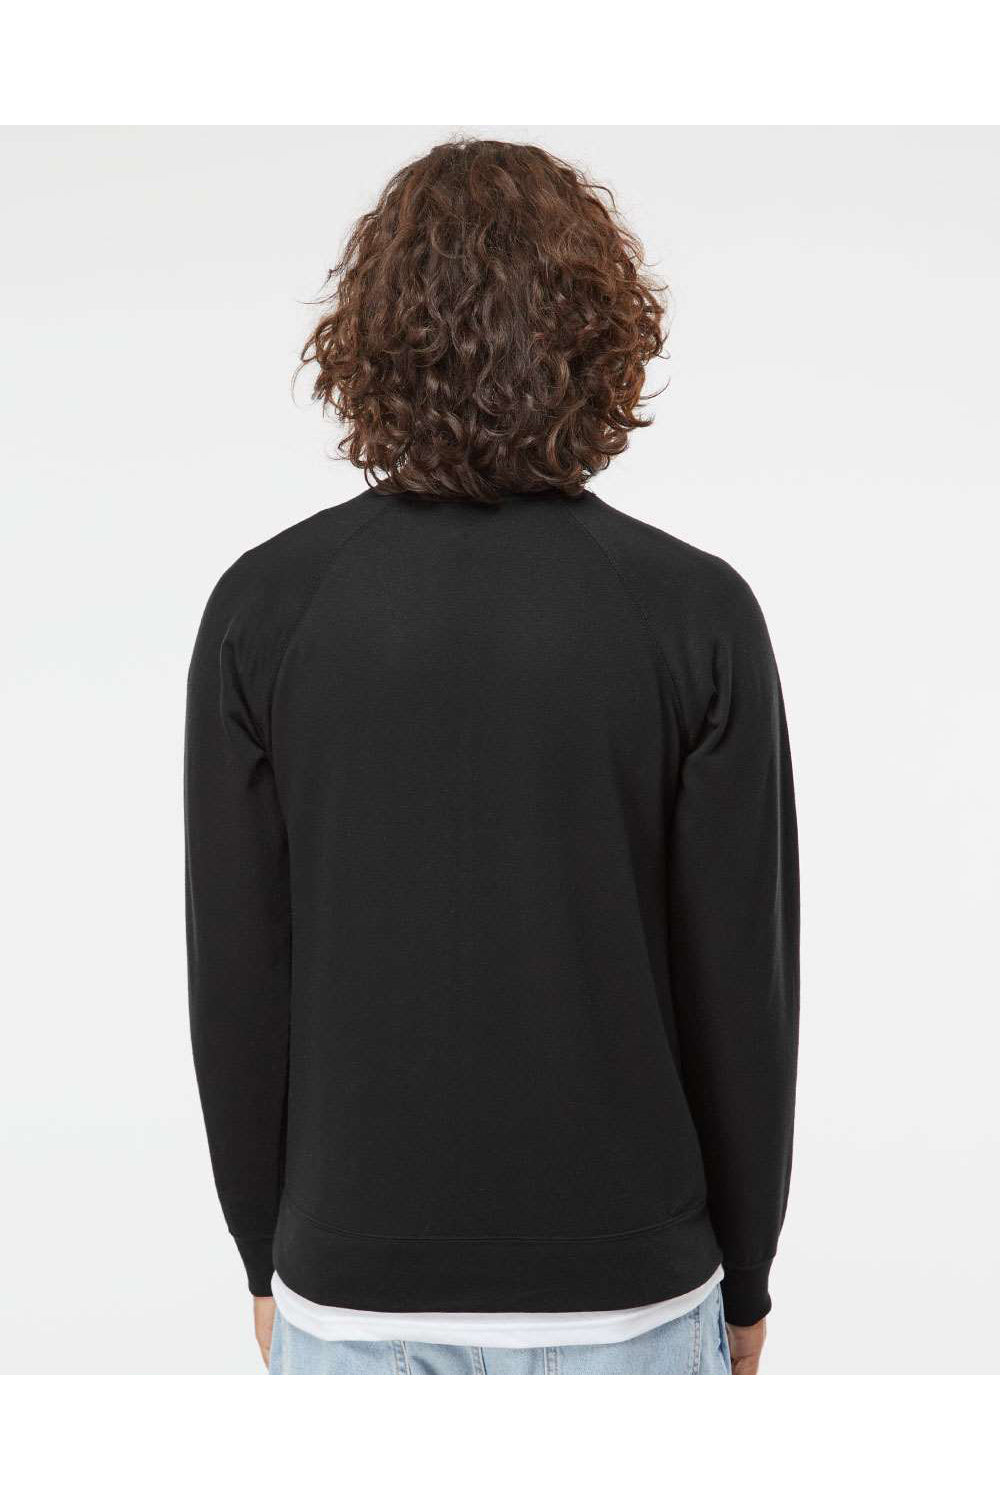 Independent Trading Co. SS1000C Mens Icon Loopback Terry Crewneck Sweatshirt Black Model Back